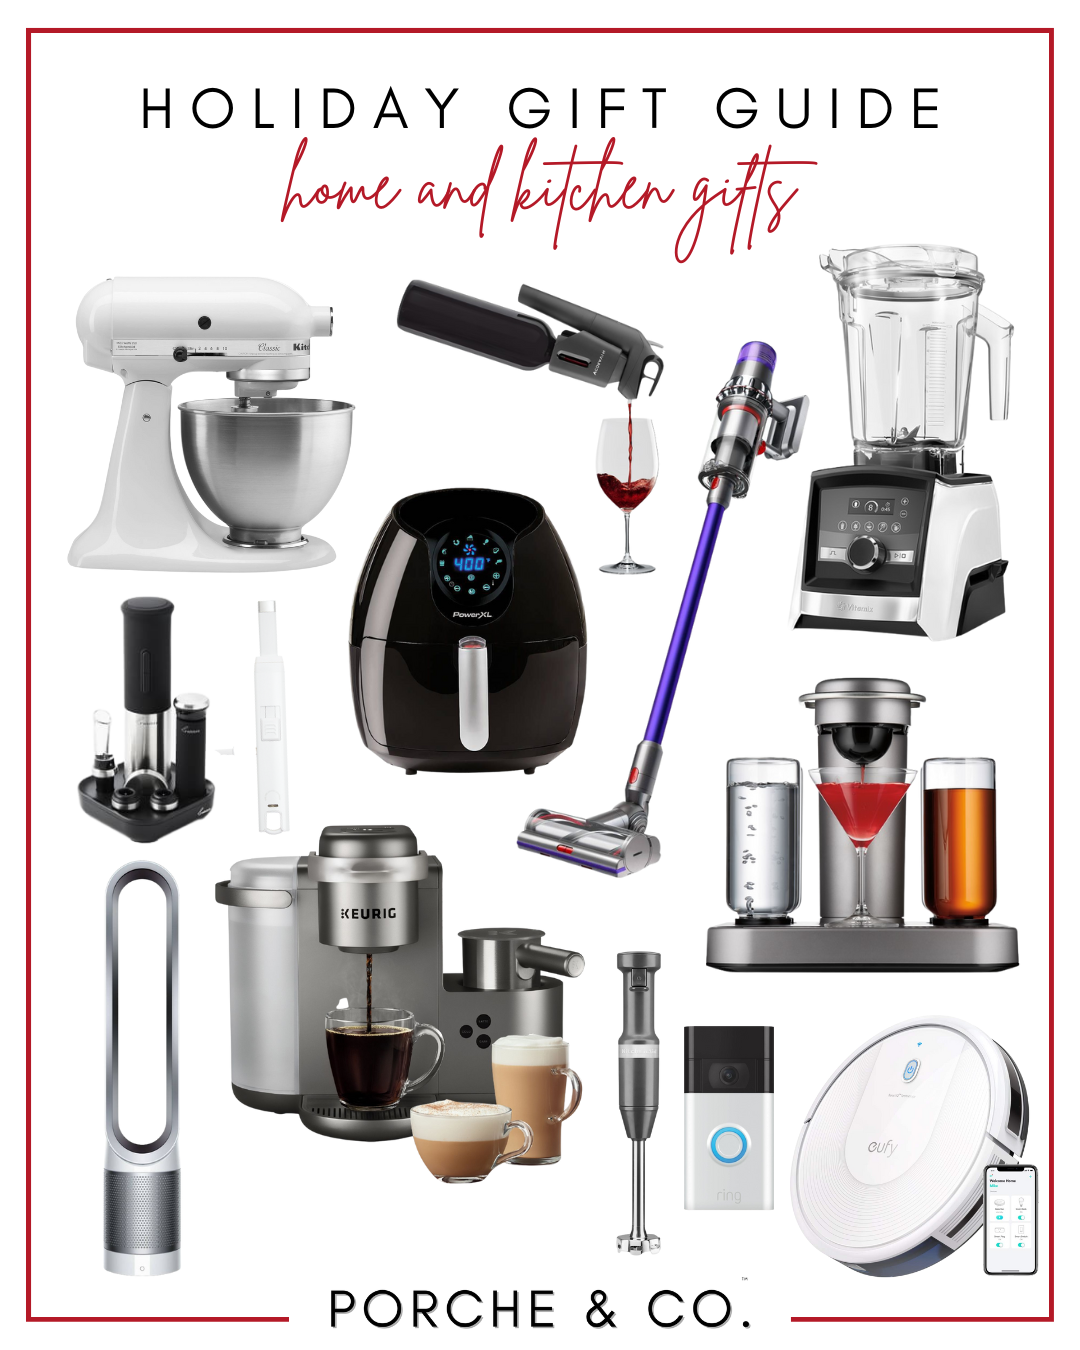 home and kitchen gifts